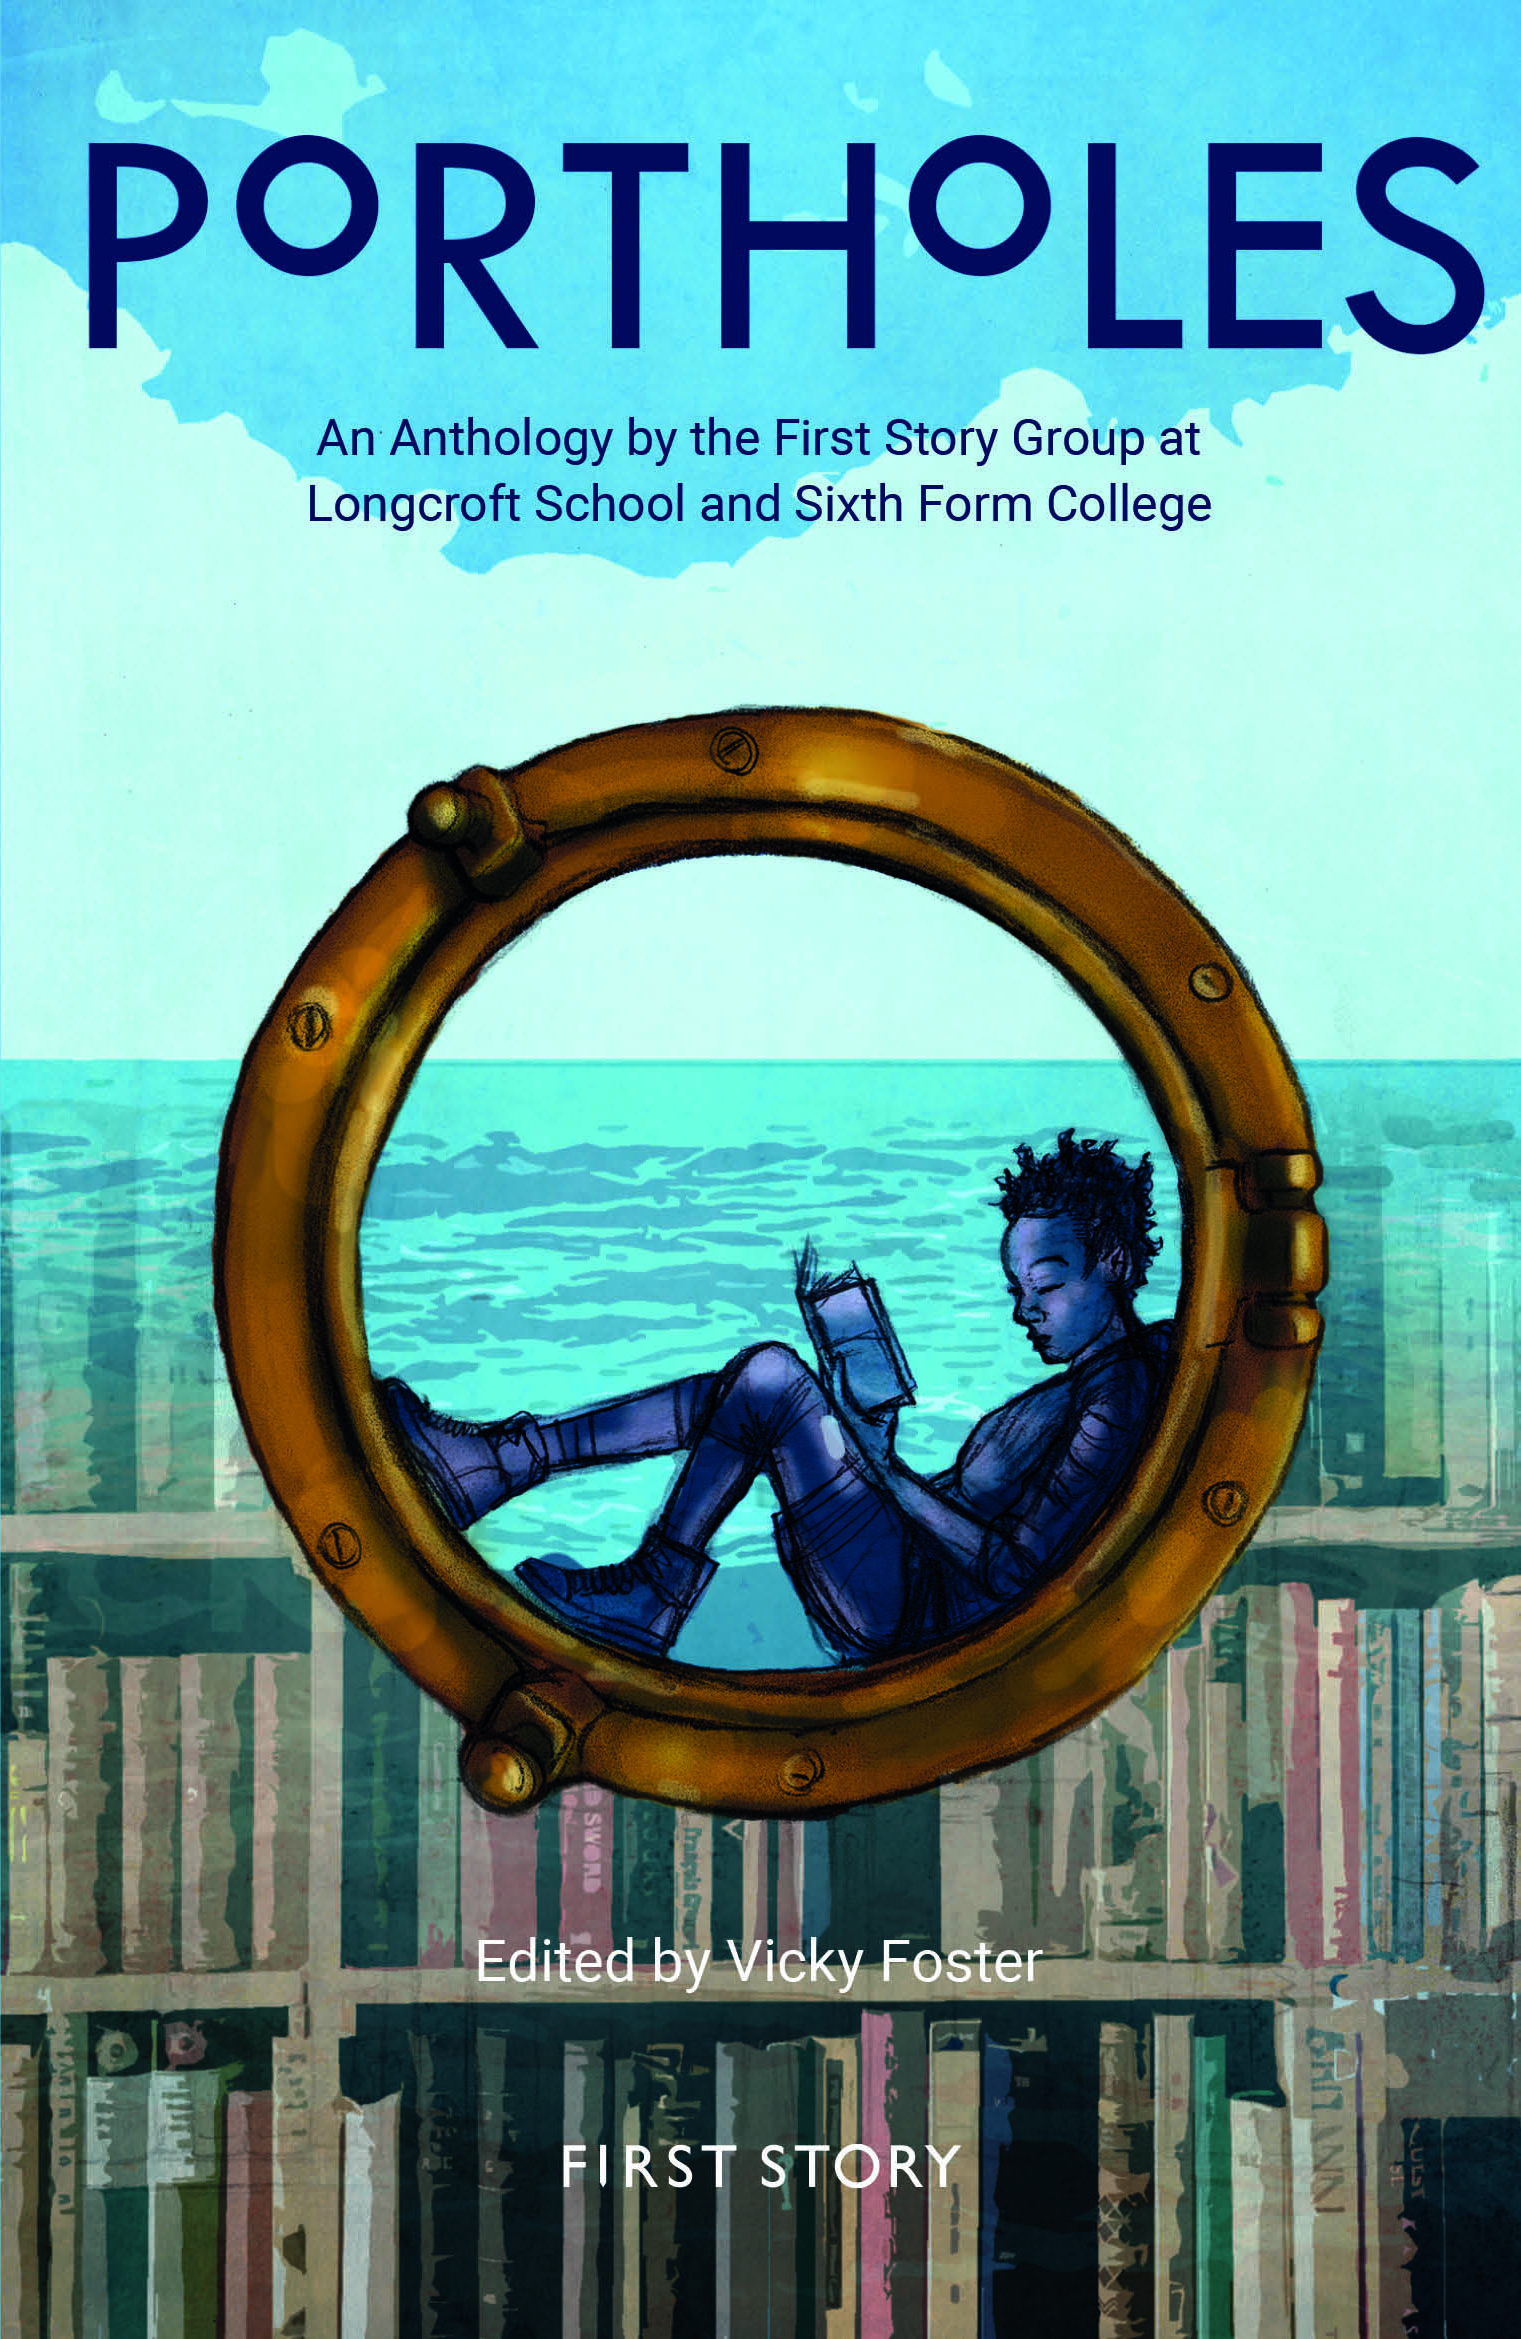 Cover of First Story Anthology for Longcroft School & Sixth Form College, titled Portholes